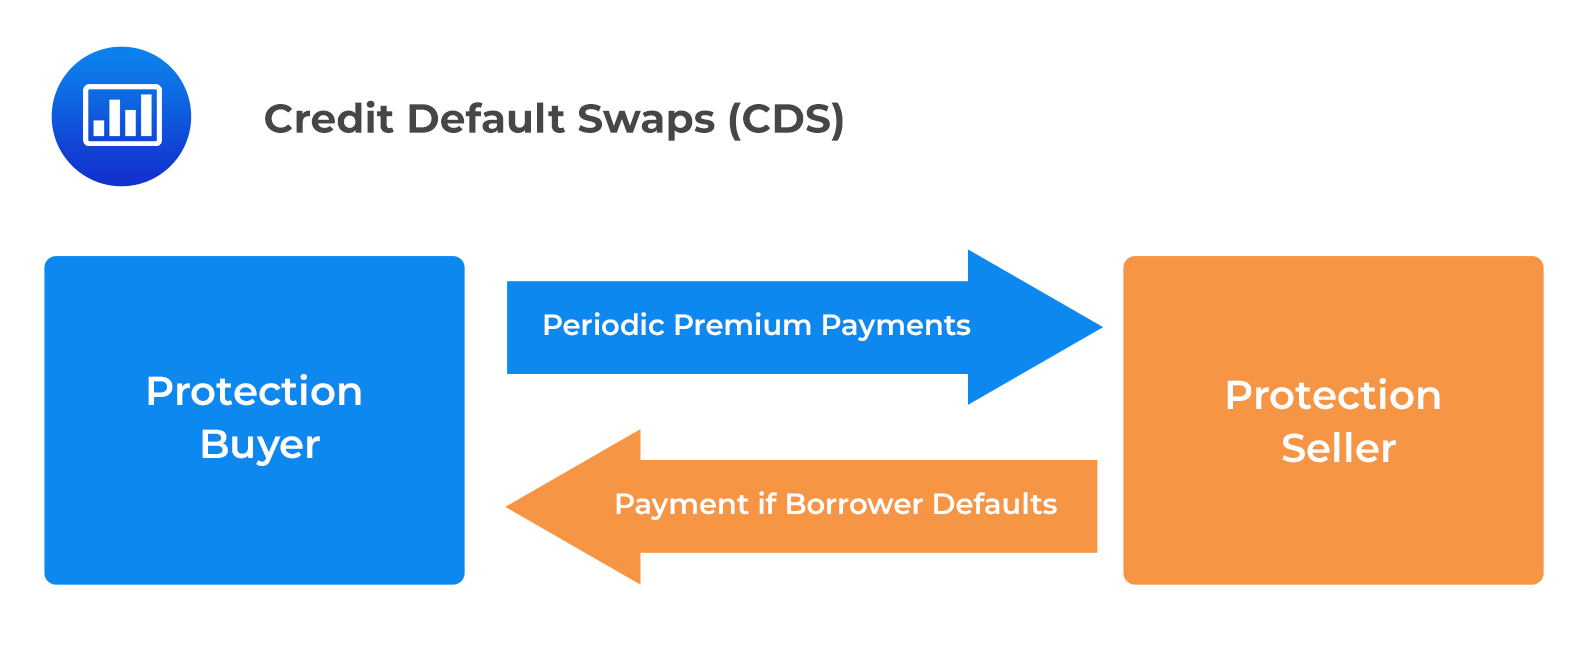 What Are Credit Default Swaps (CDS)?